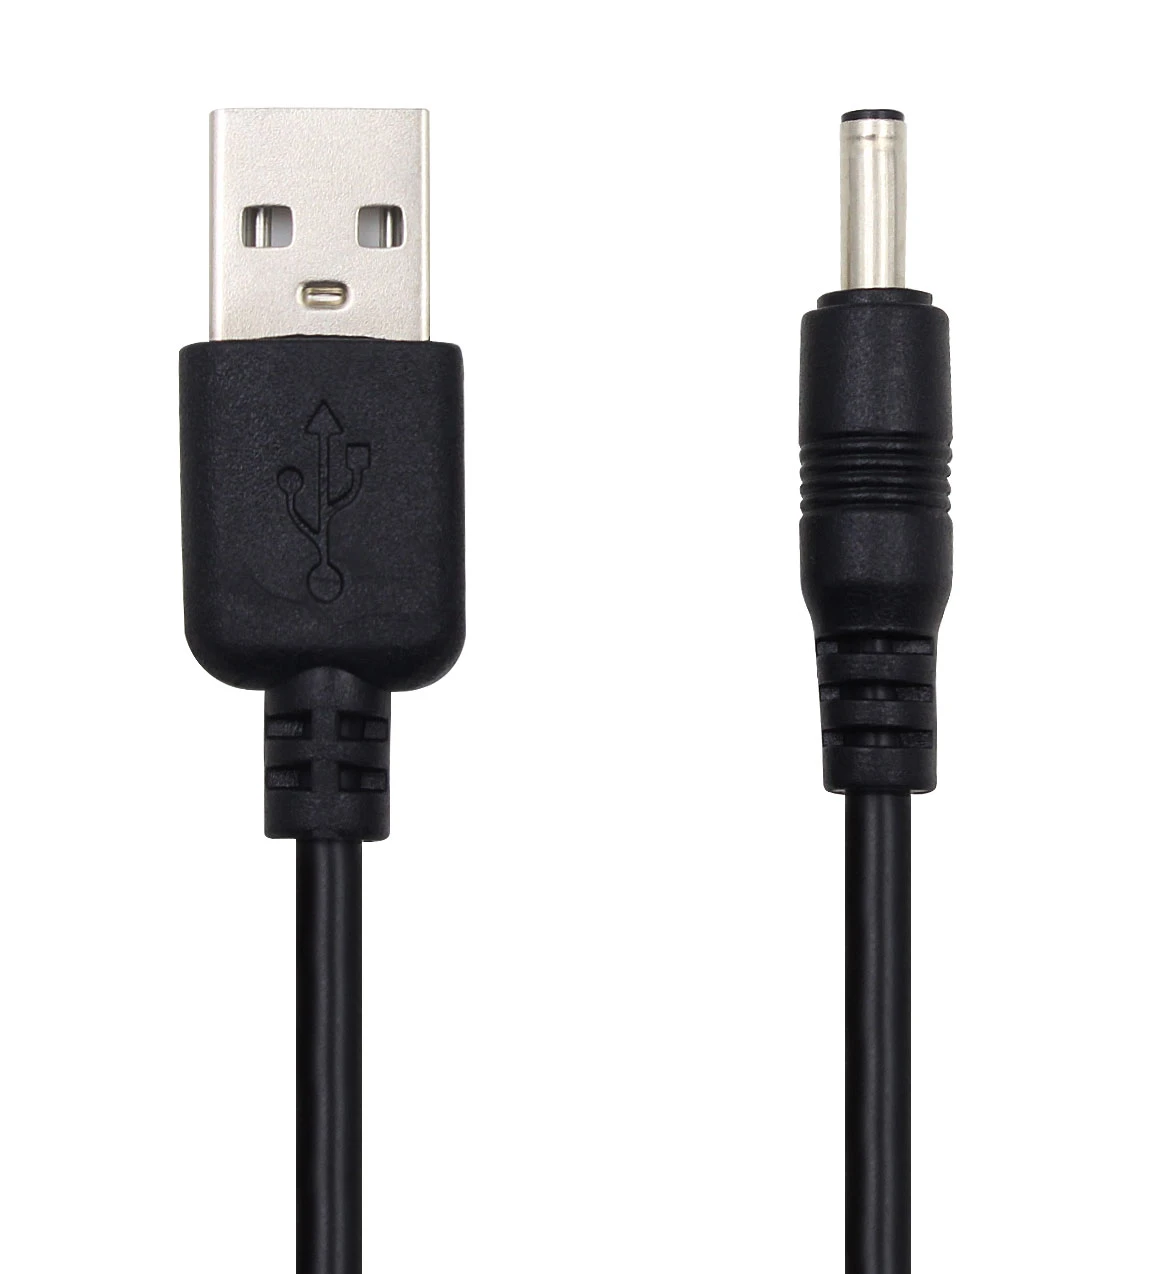 Usb Power Adapter Charger Cable Cord For August Mb400 Dab Radio Speakers -  Data Cables - AliExpress